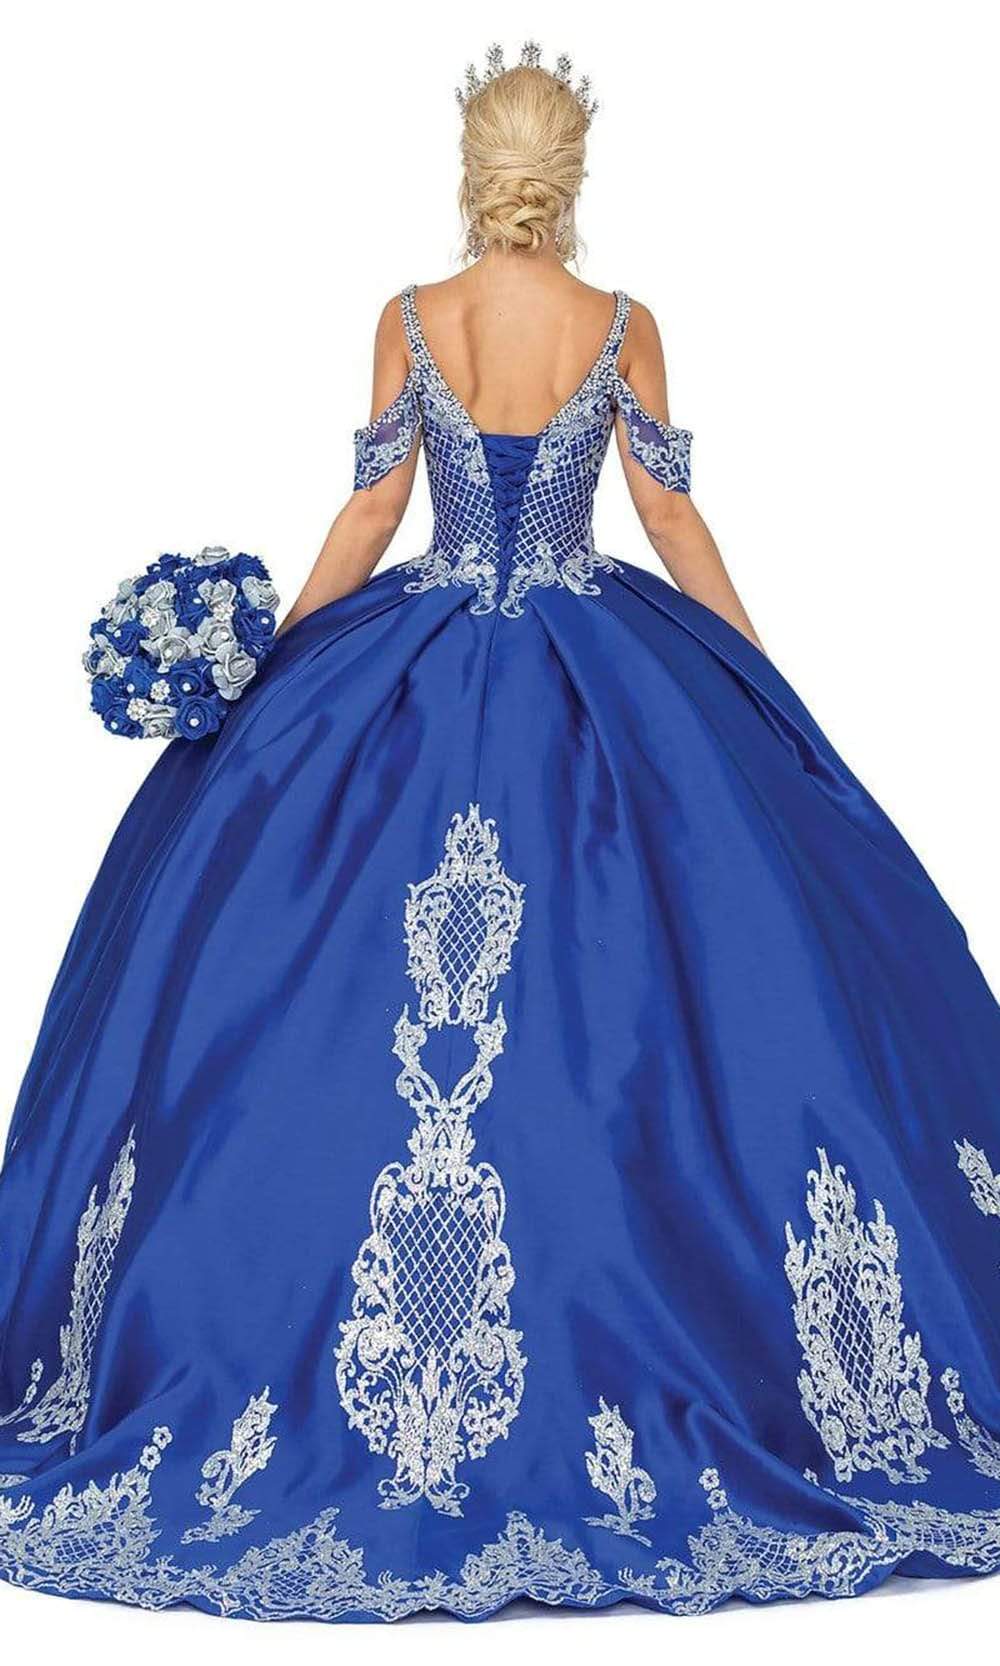 Dancing Queen - 1622 Cold Shoulder Embellished Ballgown Special Occasion Dress